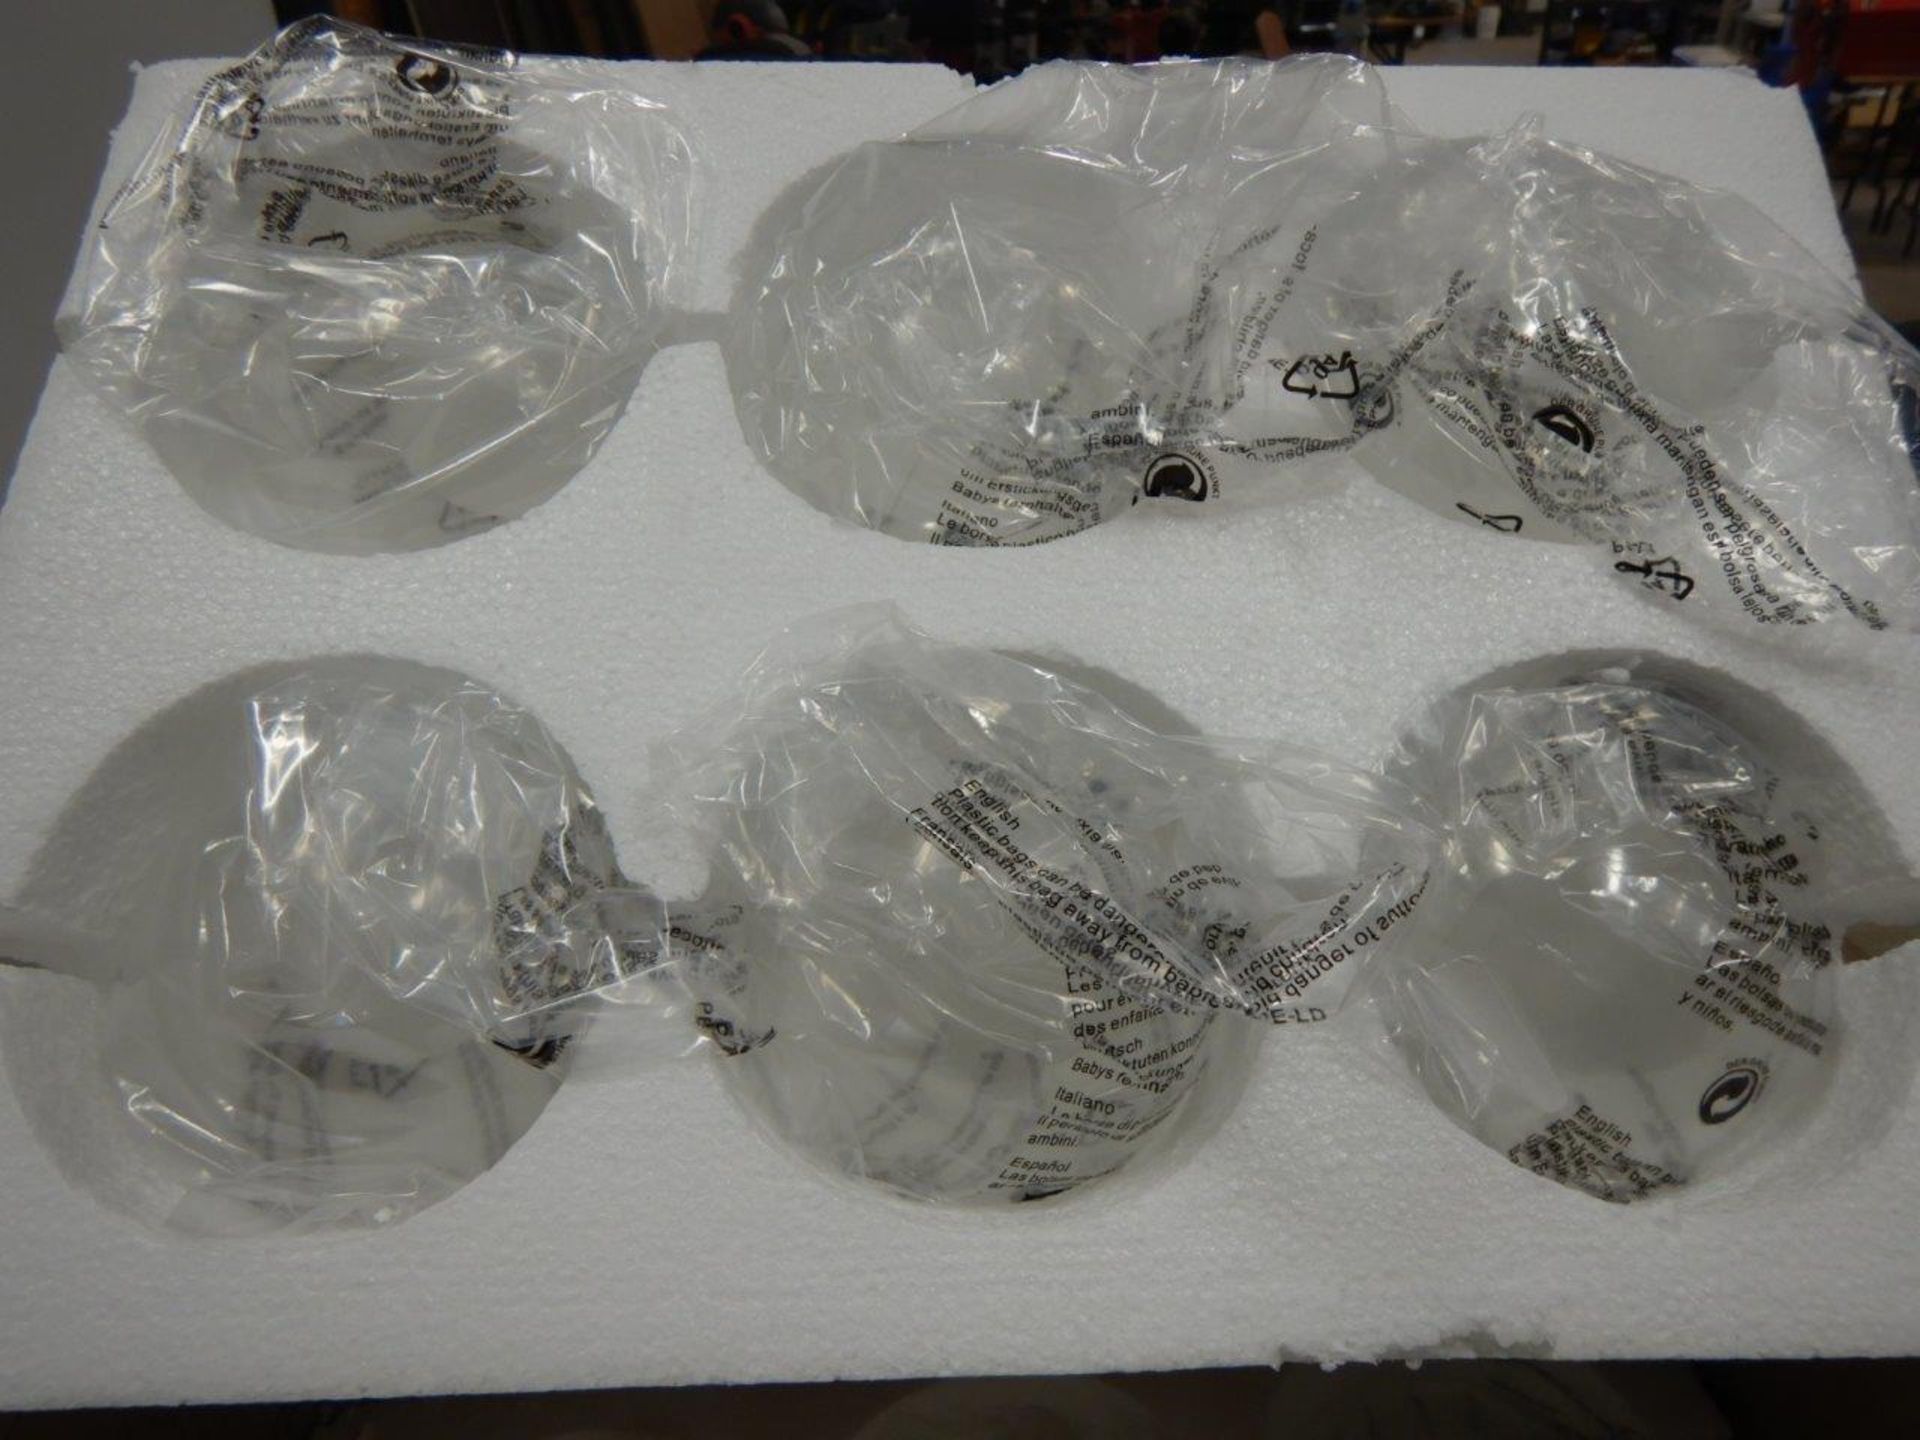 ASSORTED LIGHT FIXTURES AND LIGHT SHROUD GLOBES - Image 4 of 4